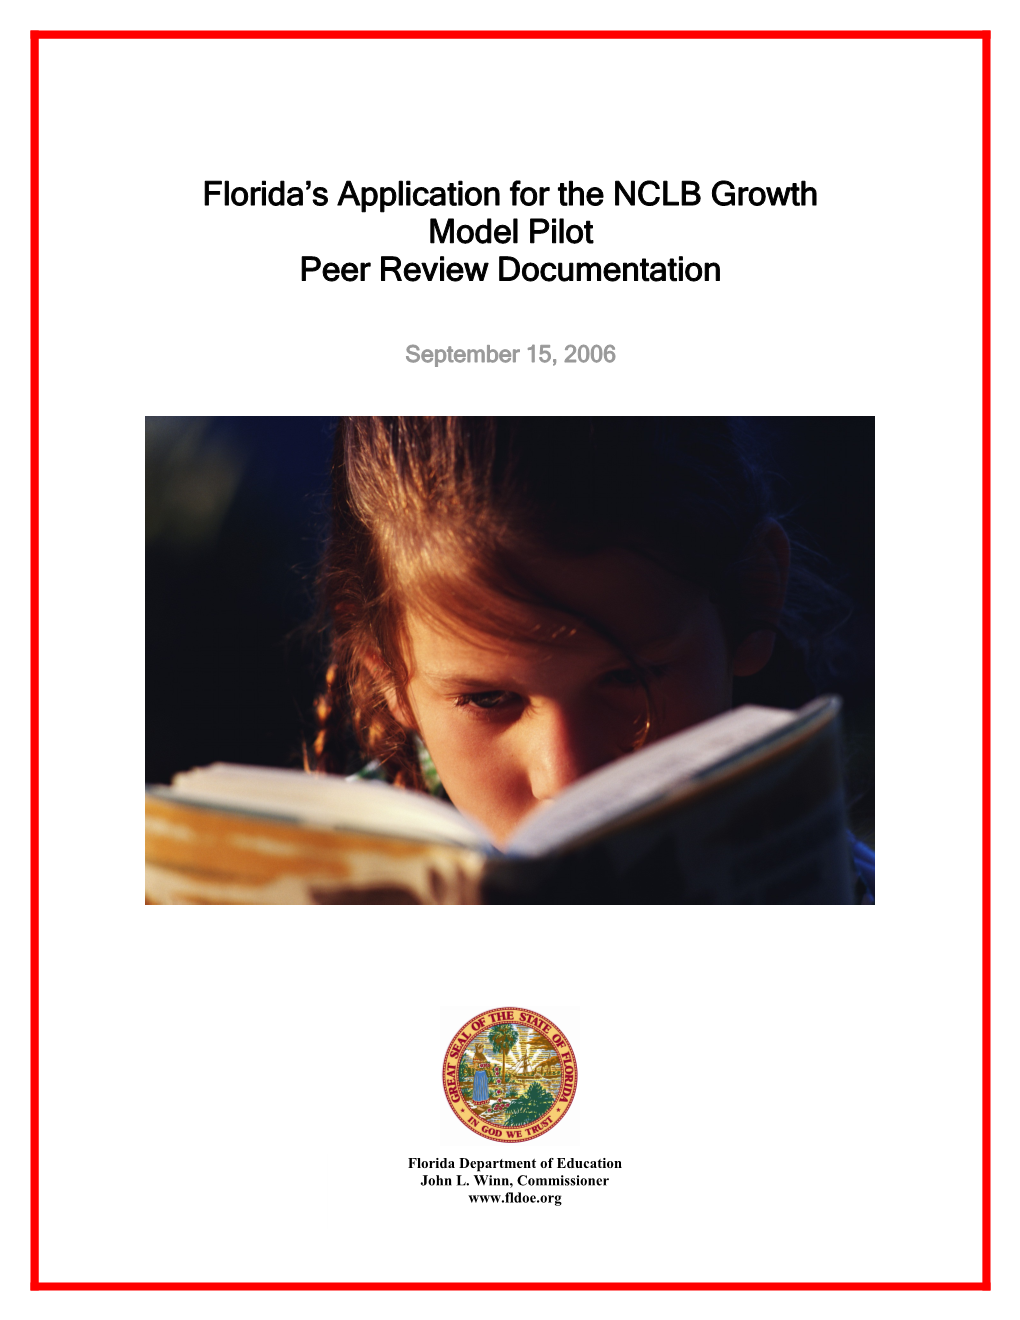 Florida's Growth Model Proposal Revisions (PDF)